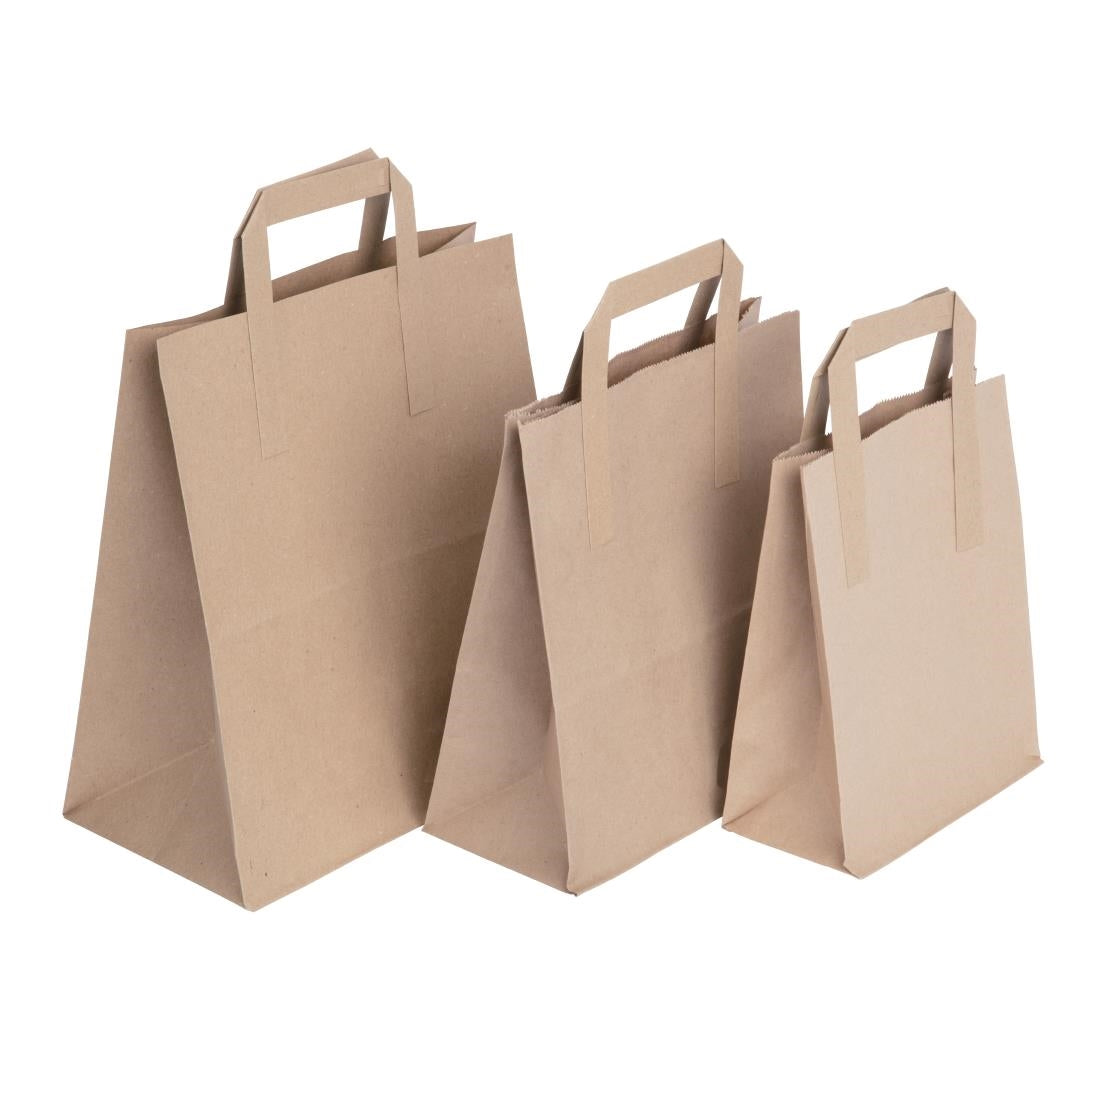 Fiesta Green Recycled Brown Paper Carrier Bags Small (Pack of 250) JD Catering Equipment Solutions Ltd